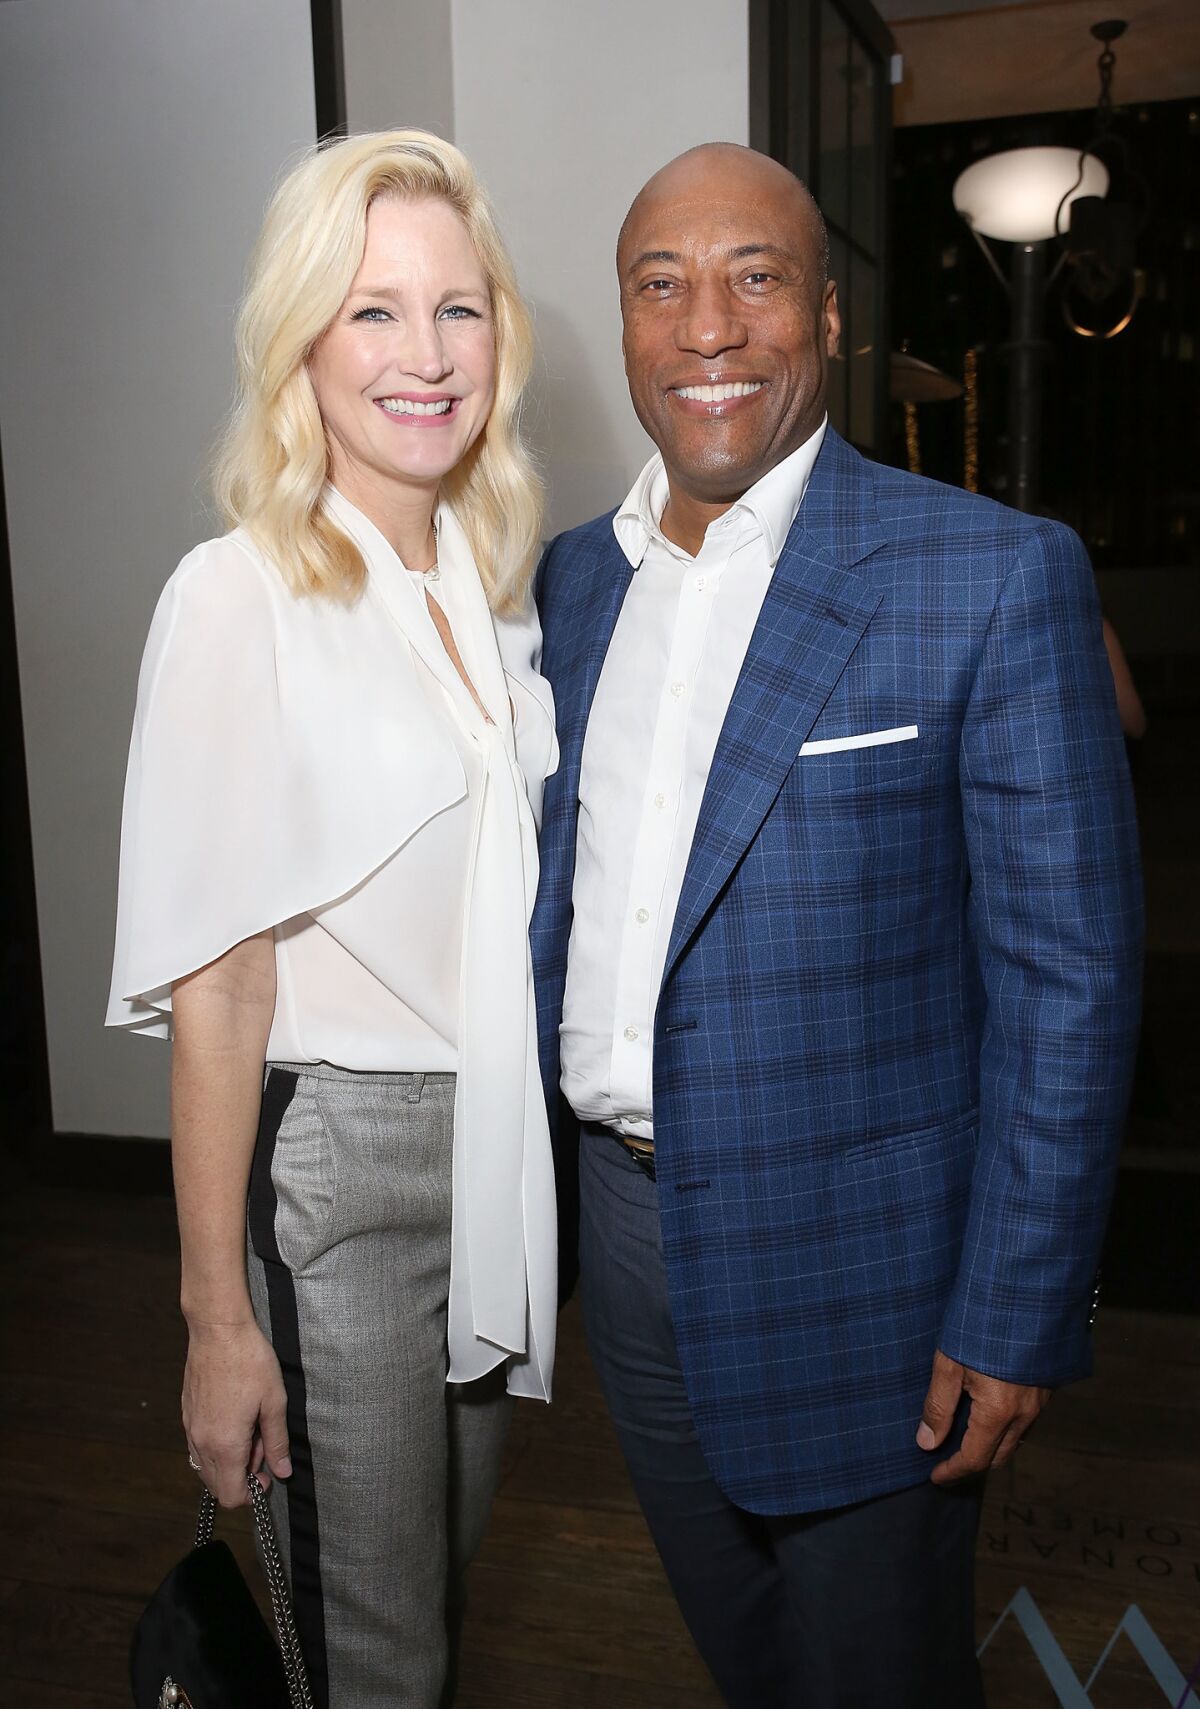 Jennifer Lucas, left, and Byron Allen at the Visionary Women's International Women's Day event.